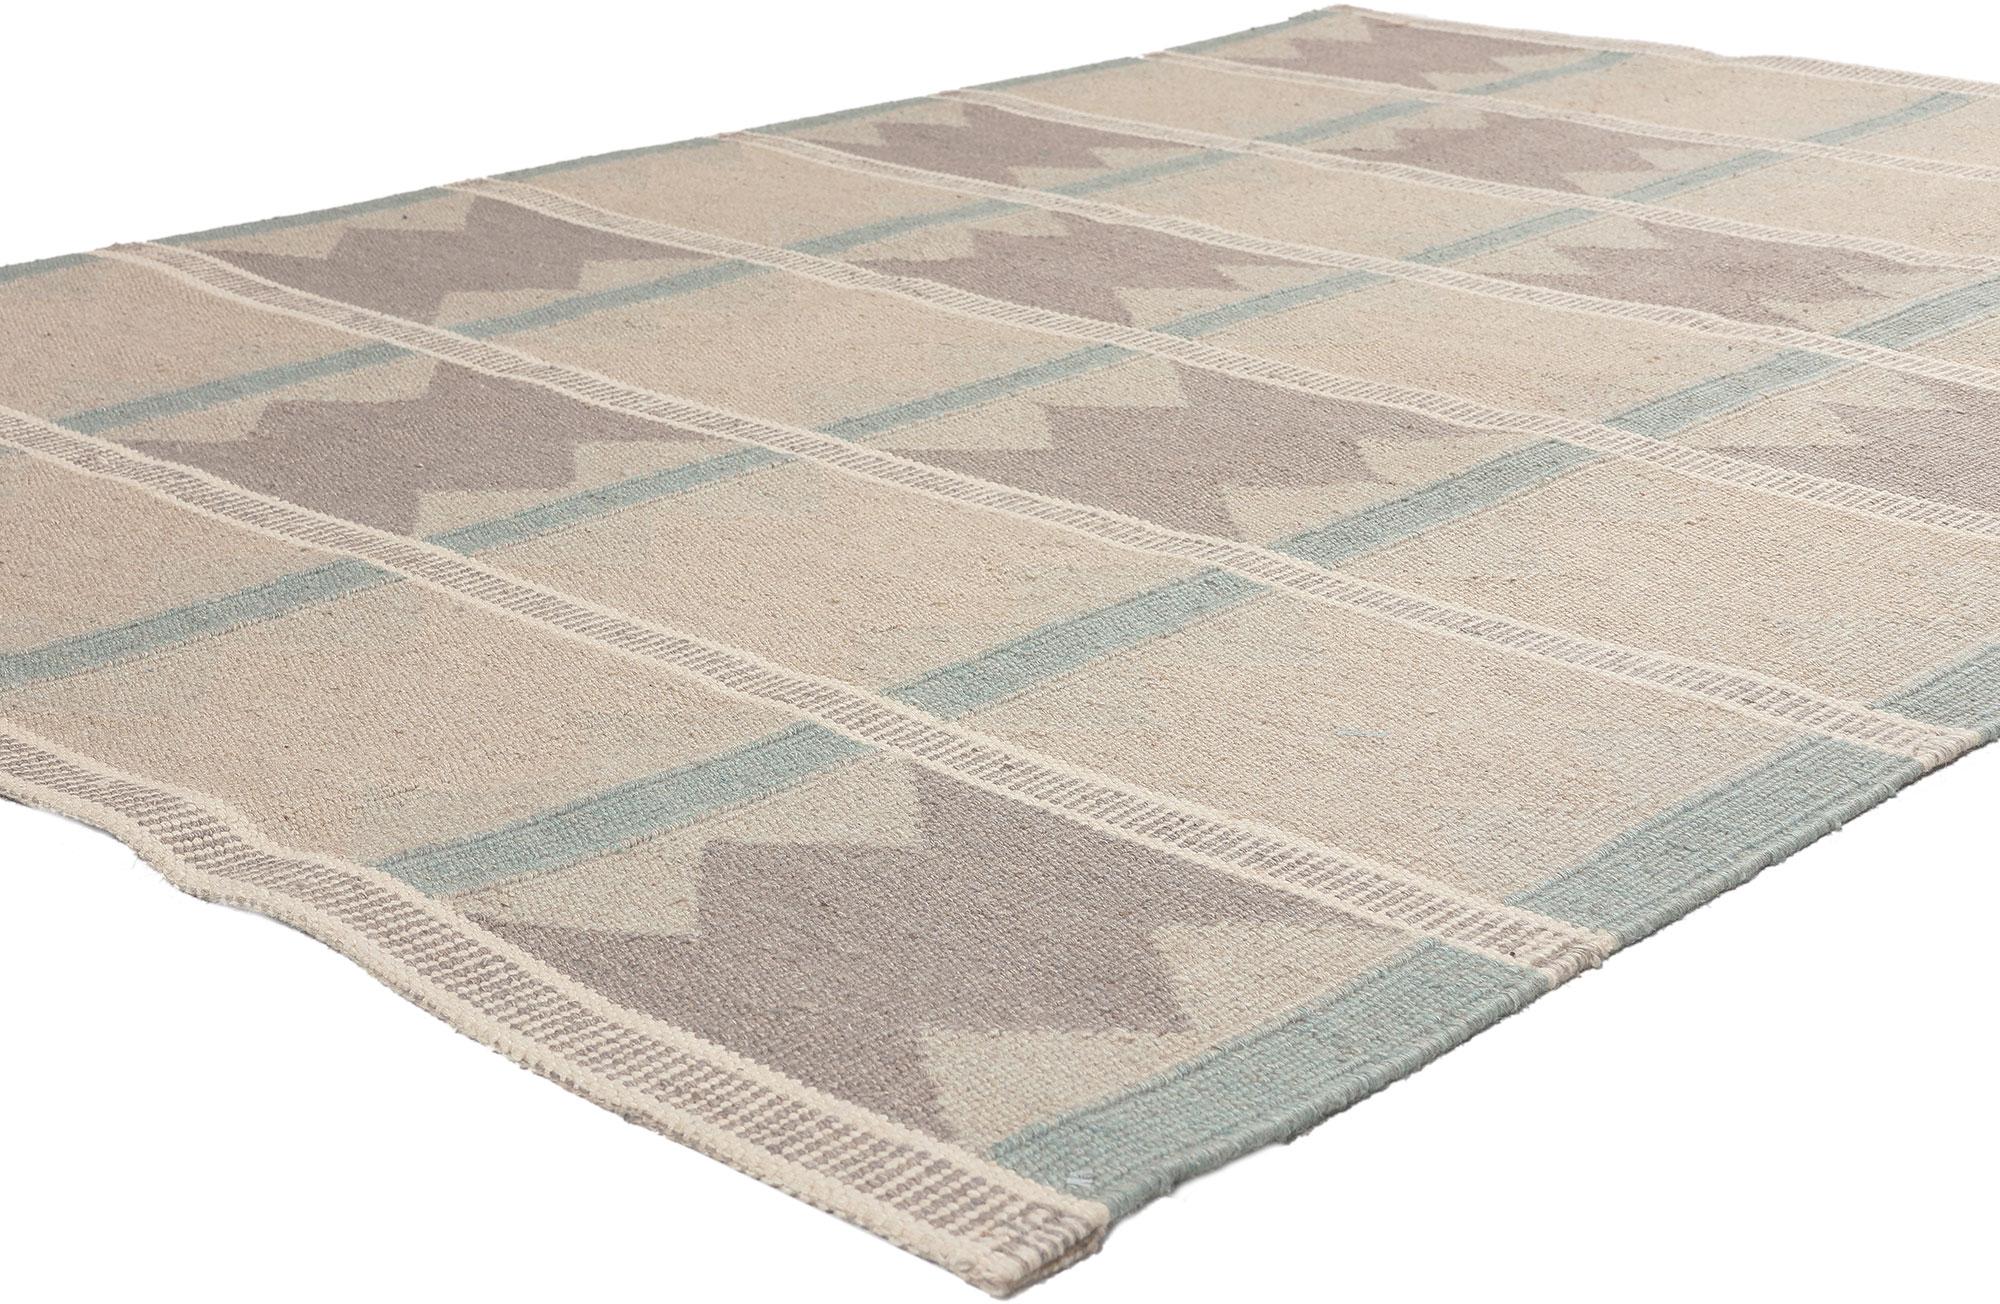 30802 Ingegerd Silow Swedish Inspired Kilim Rug, 05'04 x 07'08.
Sublime simplicity meets Scandinavian Modern style in this handwoven Swedish inspired Kilim rug. The geometric panel design and earthy hues woven into this piece work together creating